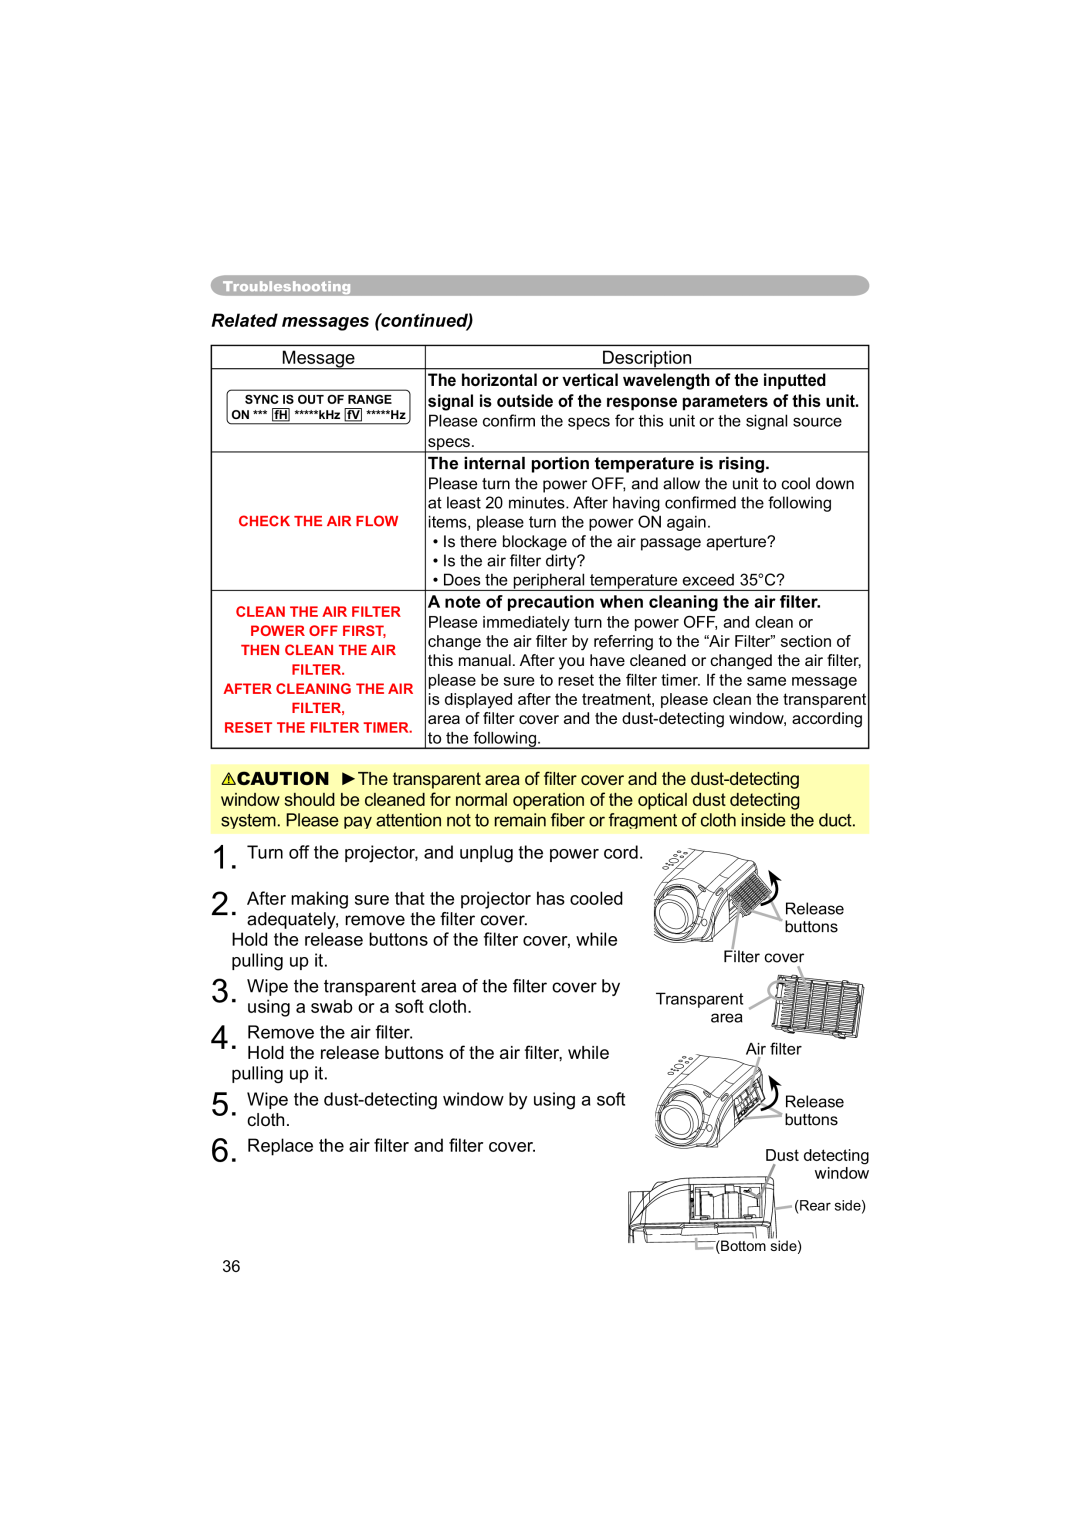 Hitachi PJ-TX100 user manual Related messages continued, The internal portion temperature is rising 